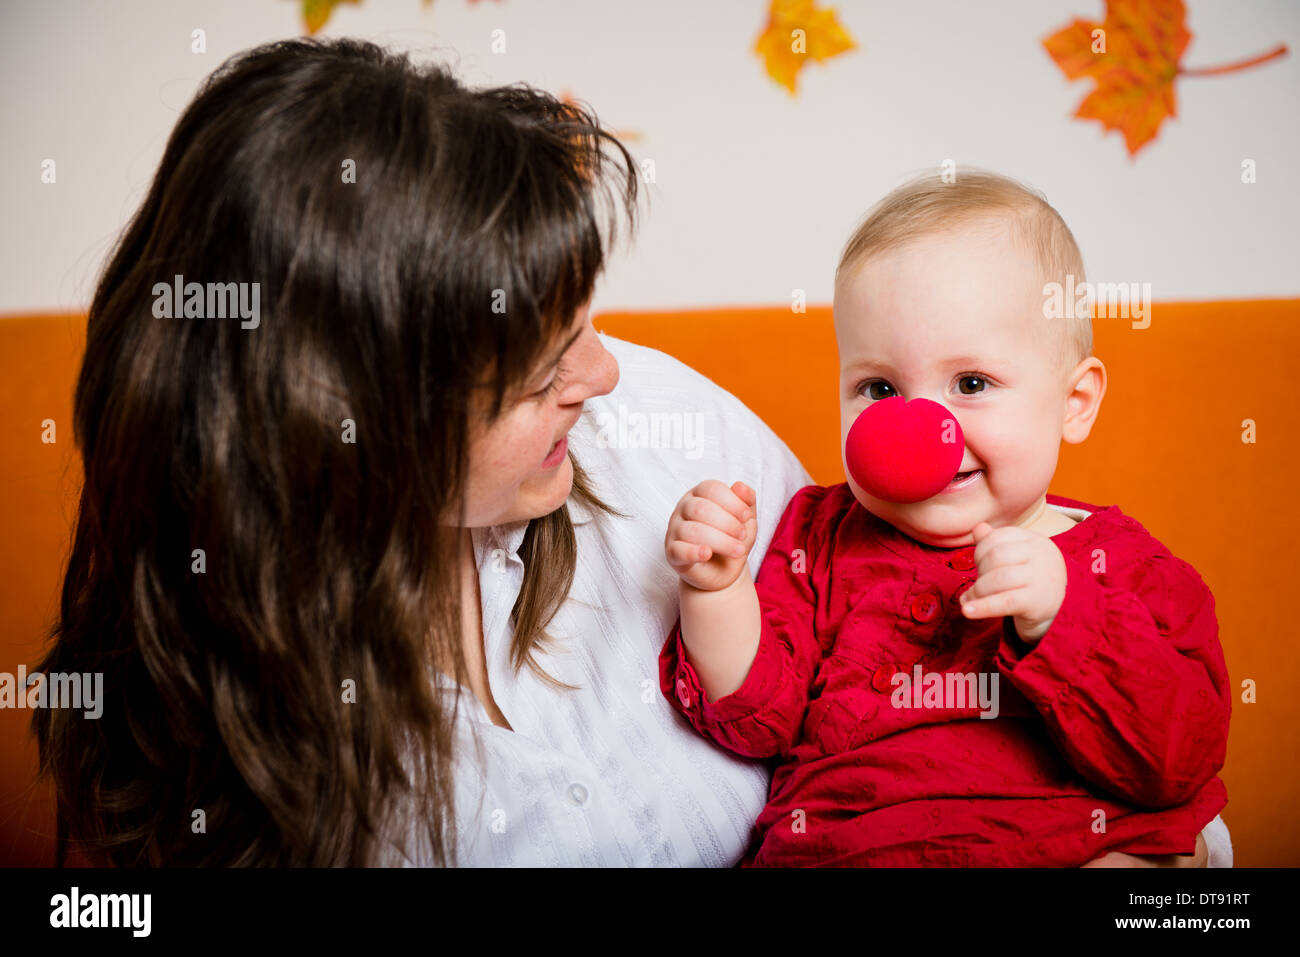 Mother playing with her smiling baby - child has red clown nose Stock Photo